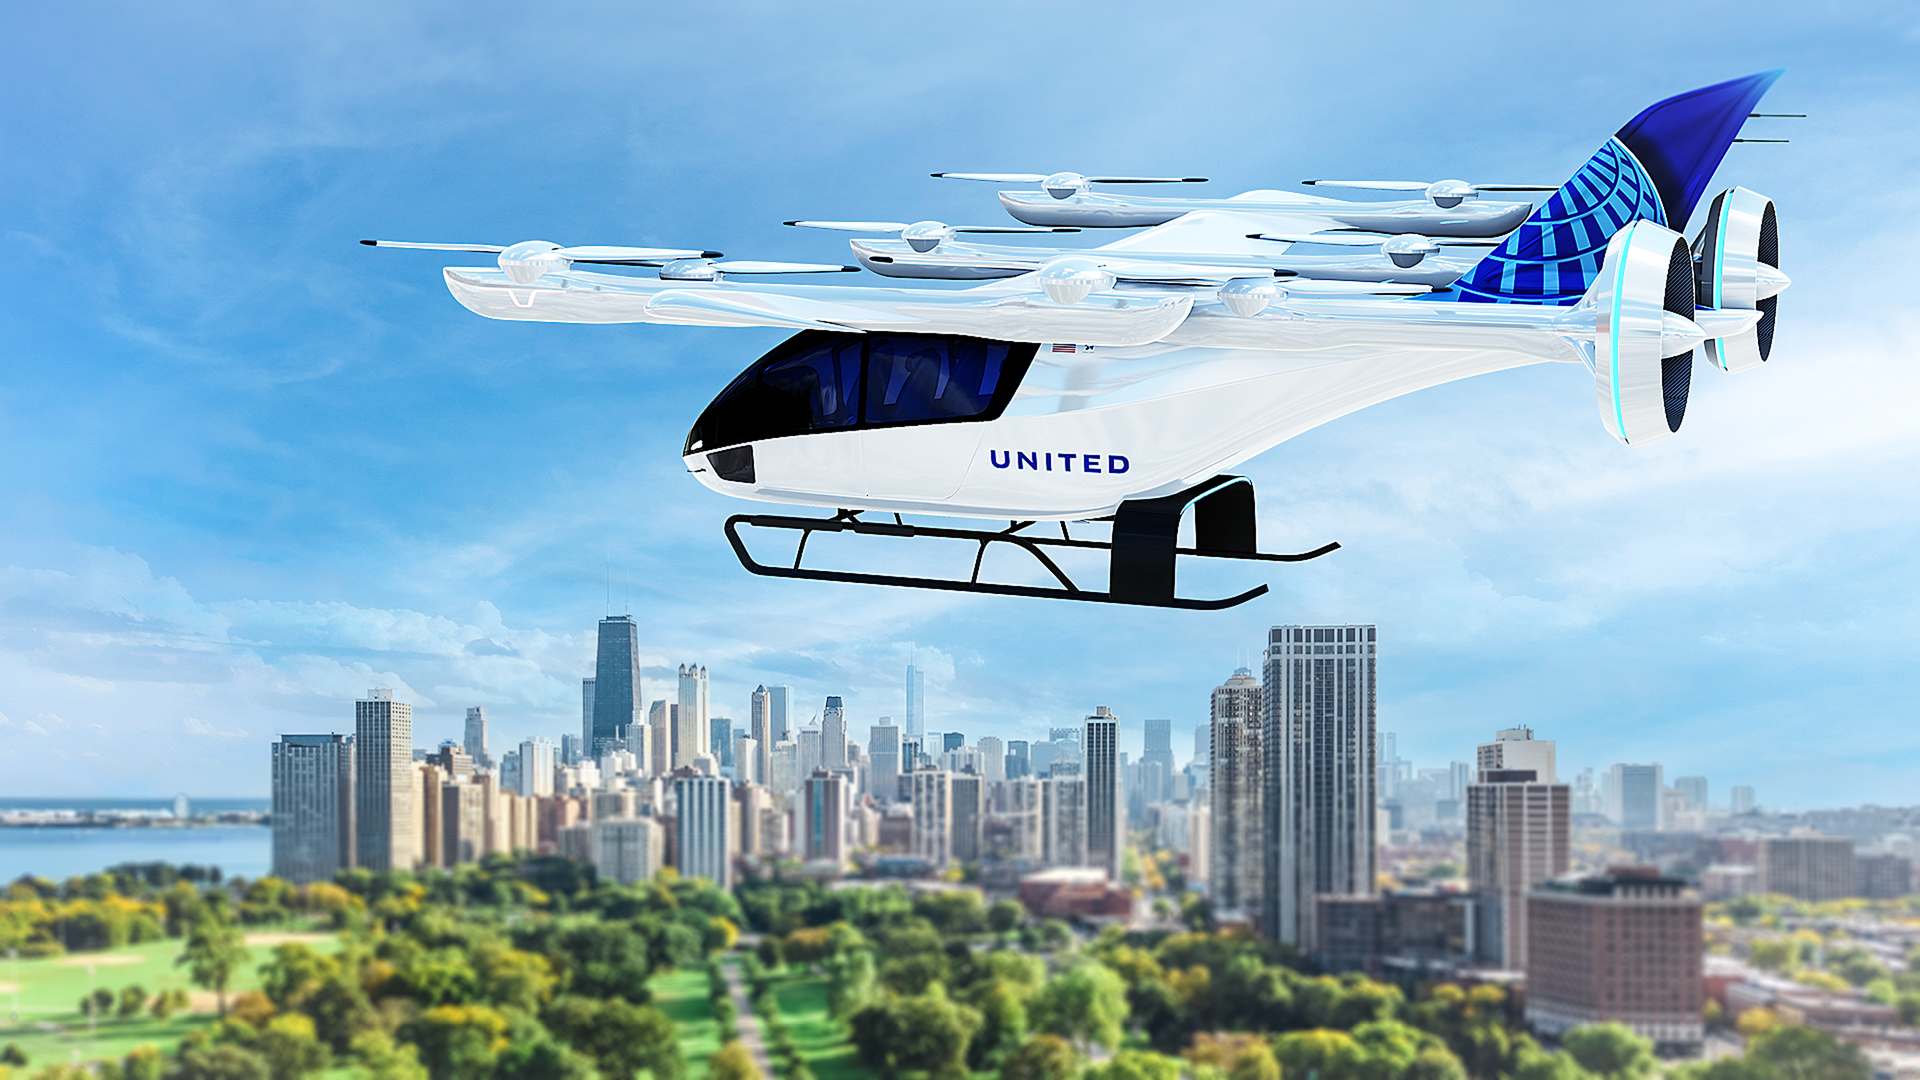 A white eVTOL with United branding flies over Chicago in an artist's rendering.